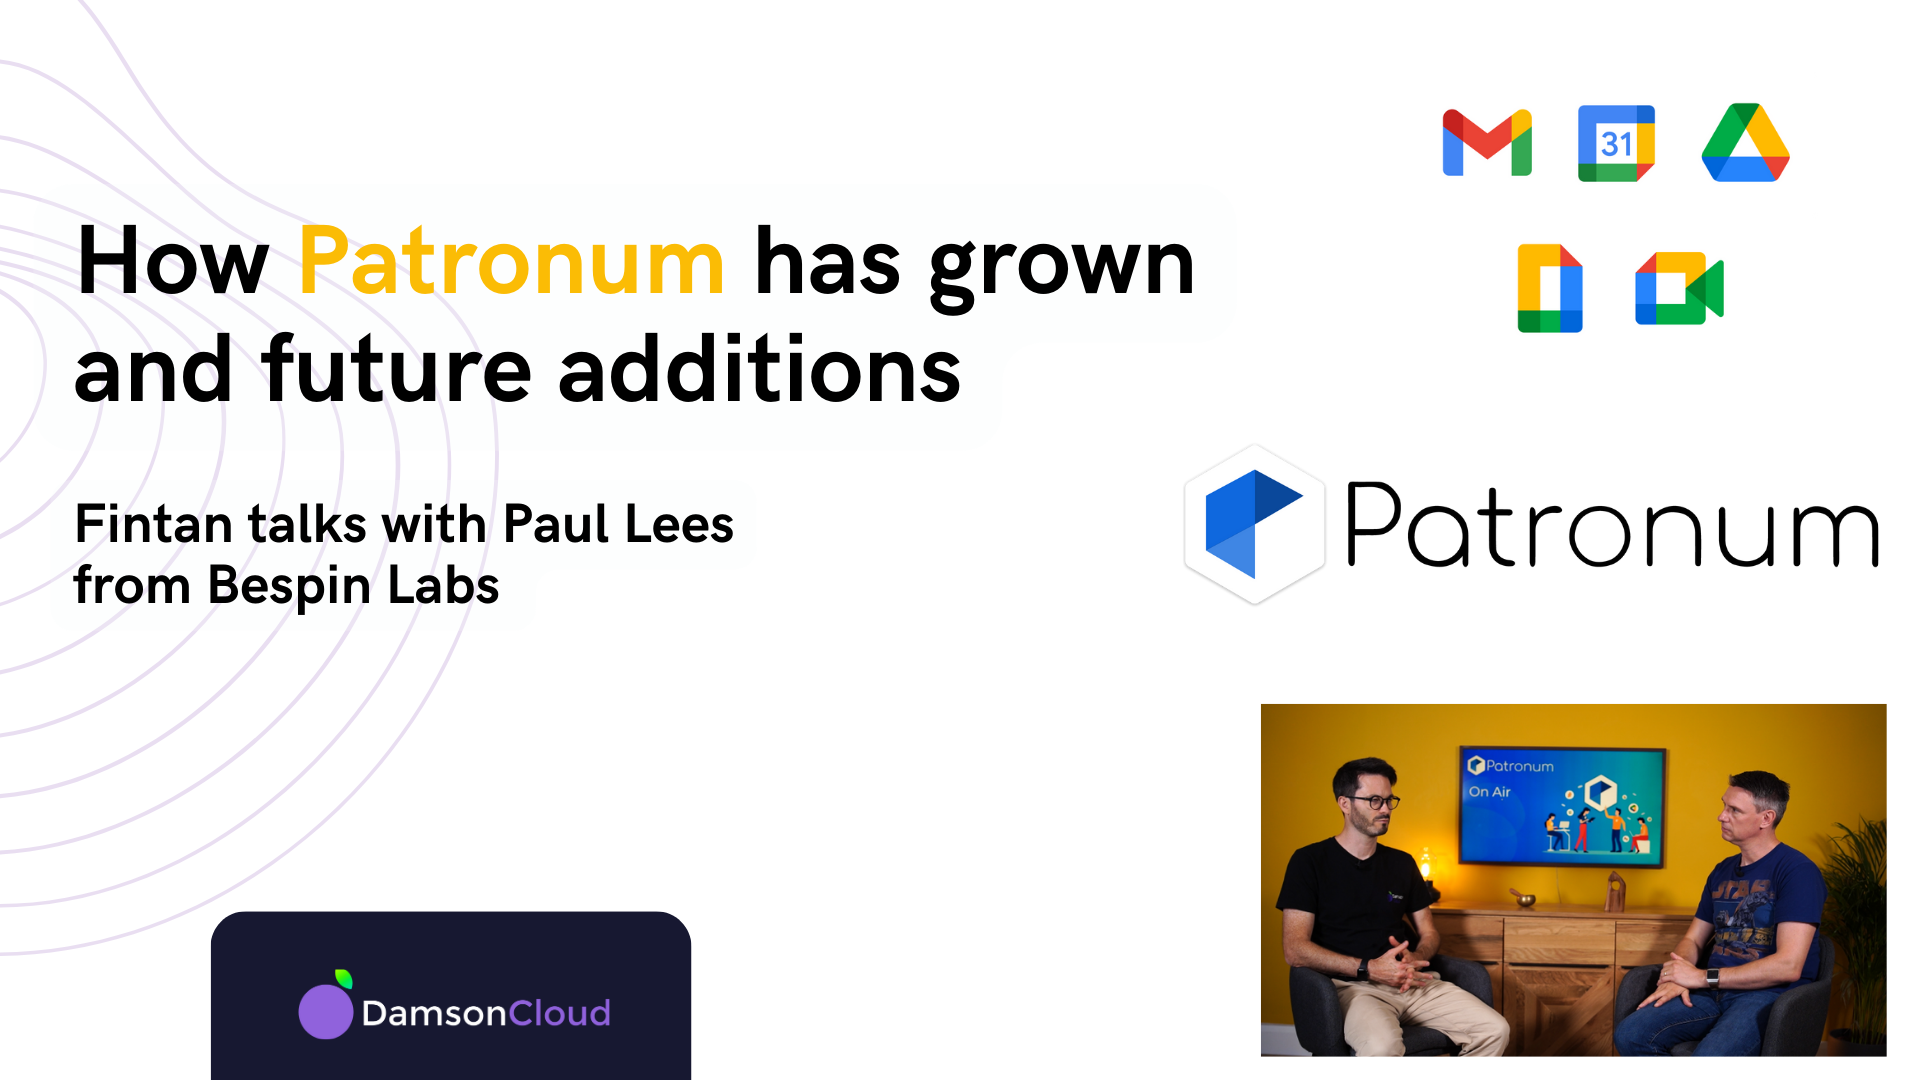 Fintan Murphy and Paul Lees talk about the future of Patronum – Damson Cloud